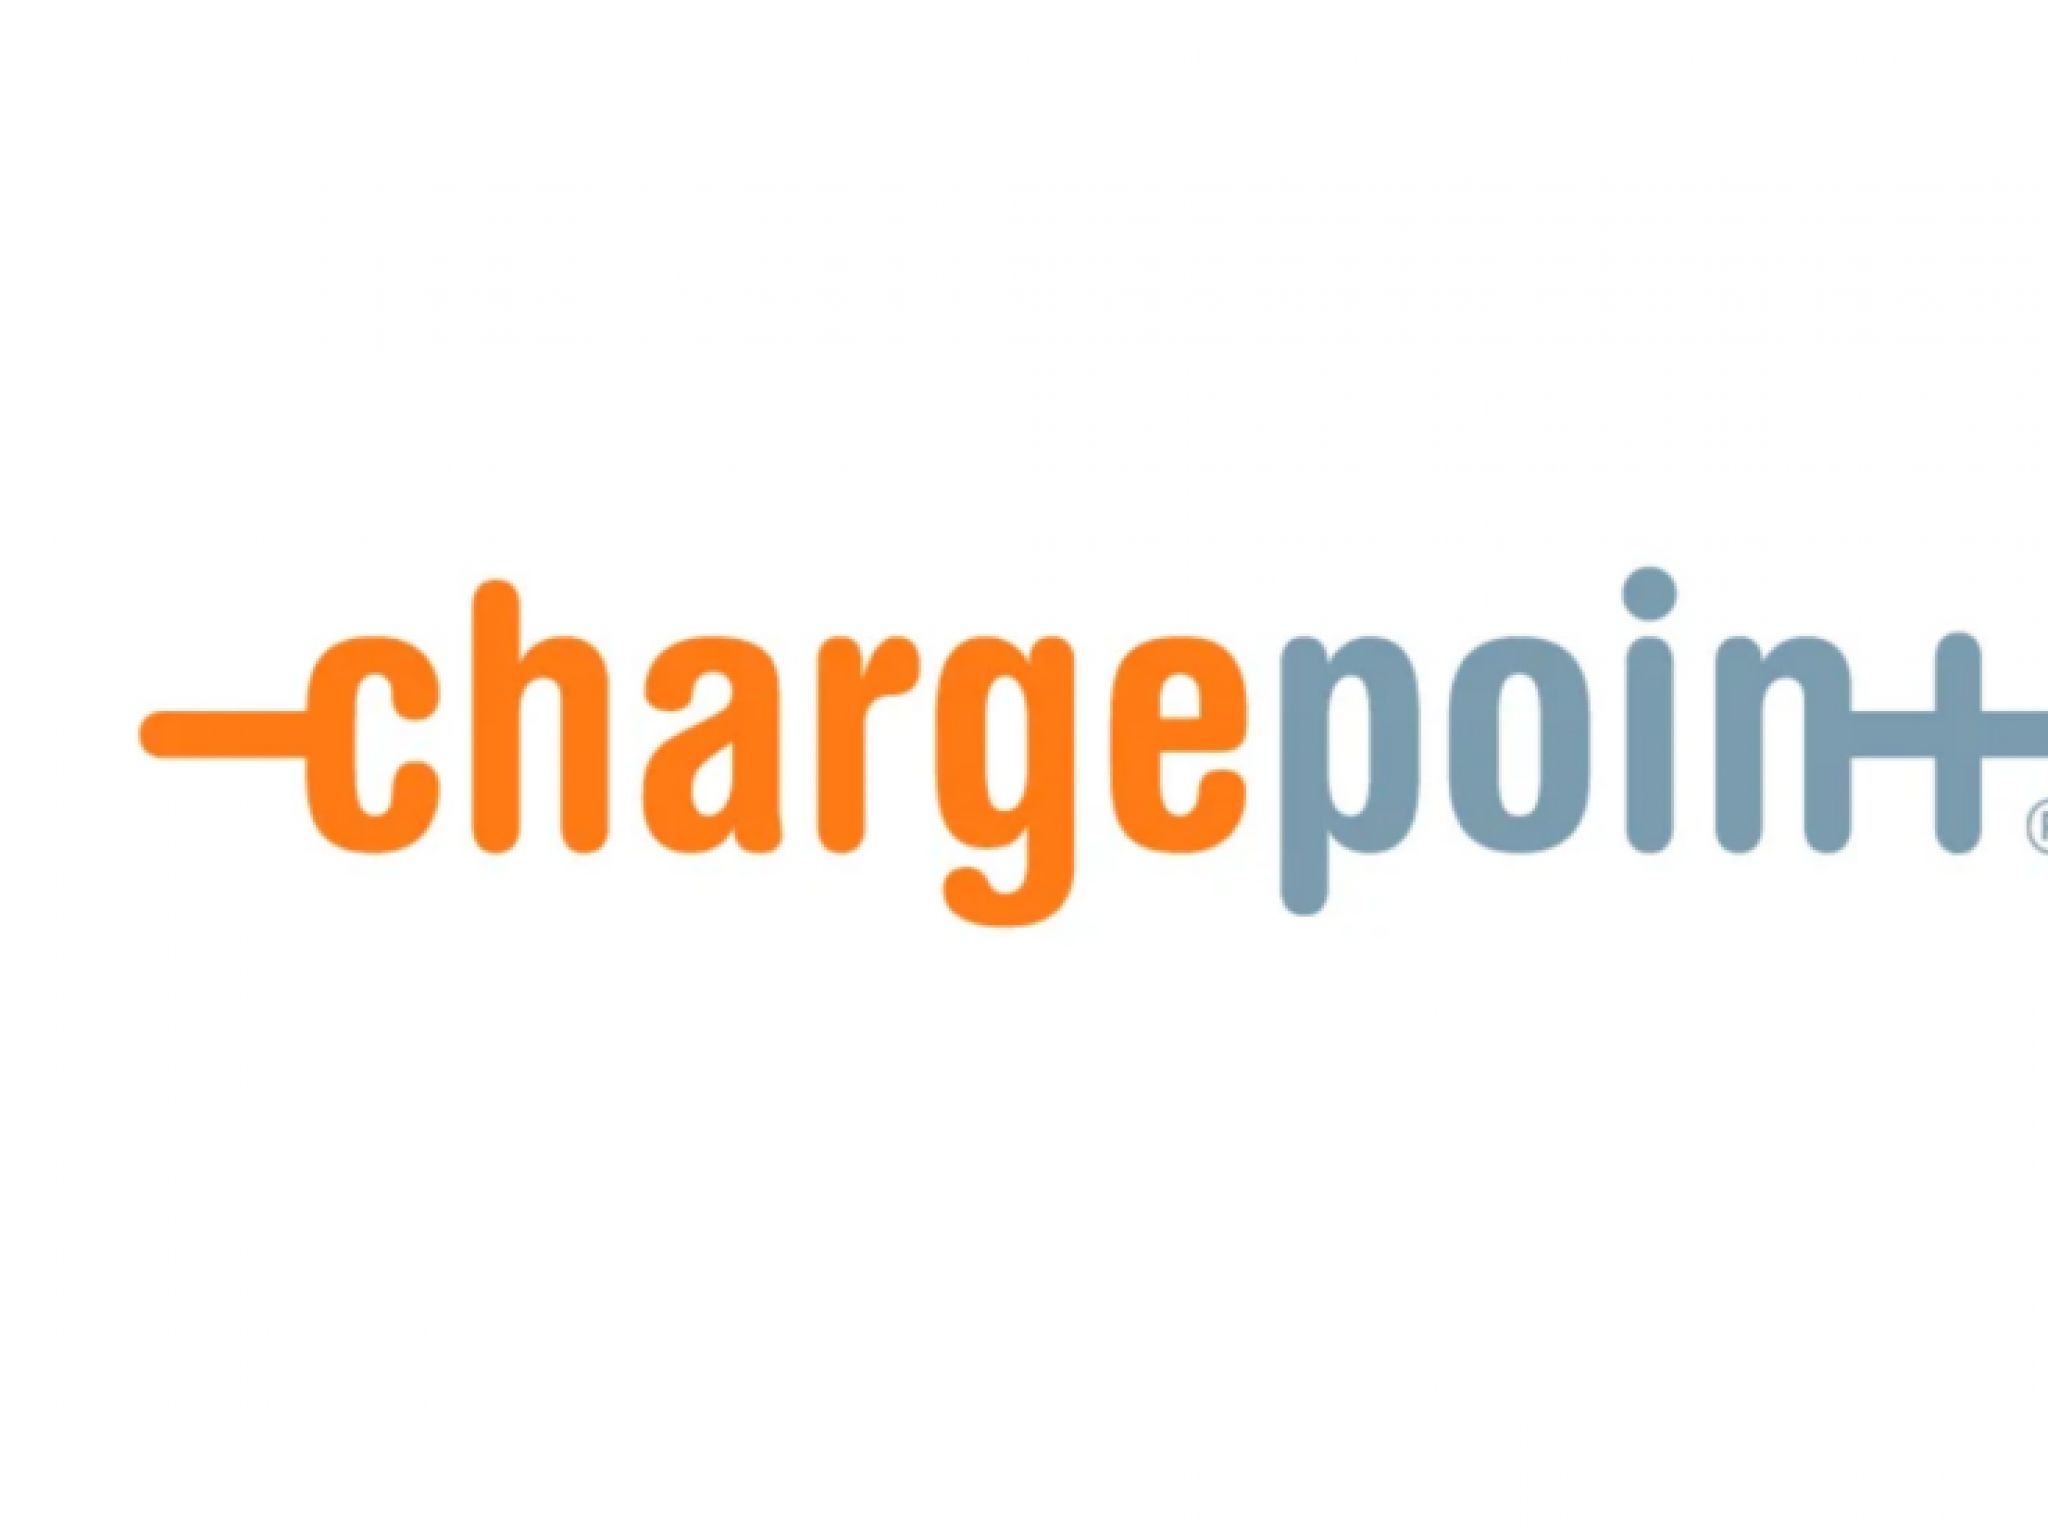  whats-going-on-with-chargepoint-shares-today 